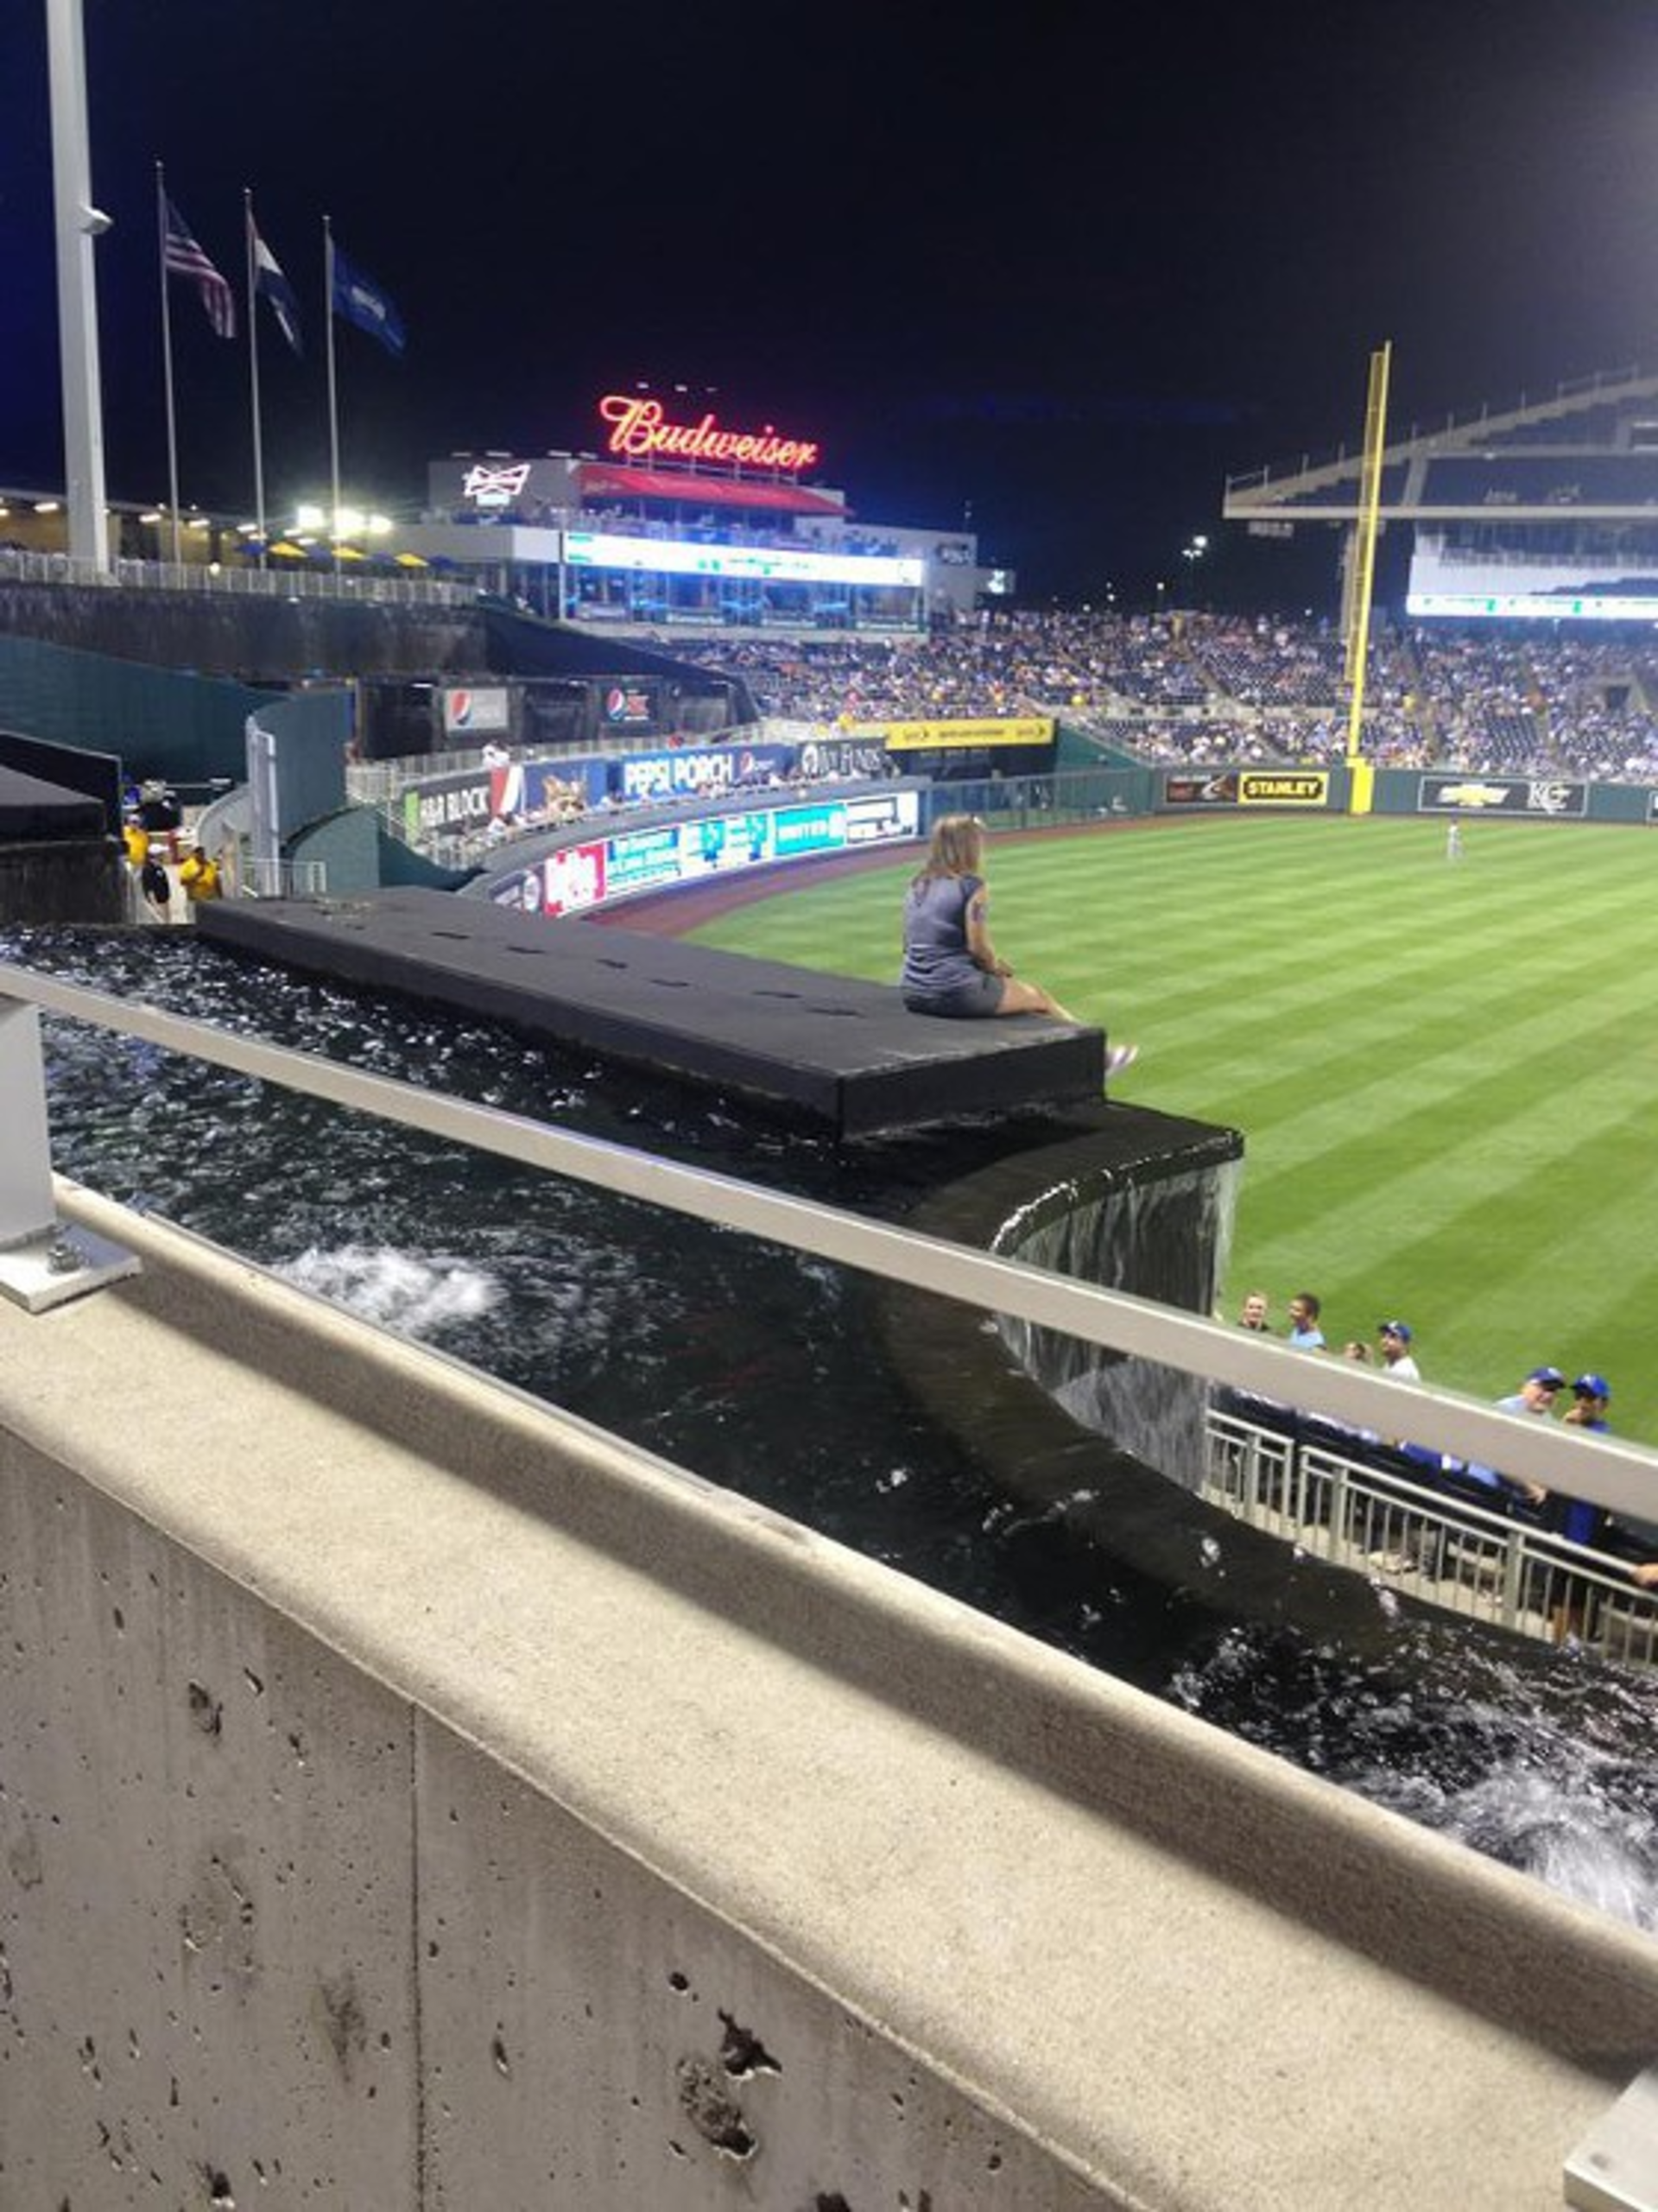 Kansas City's best Royals fan plays in the fountains